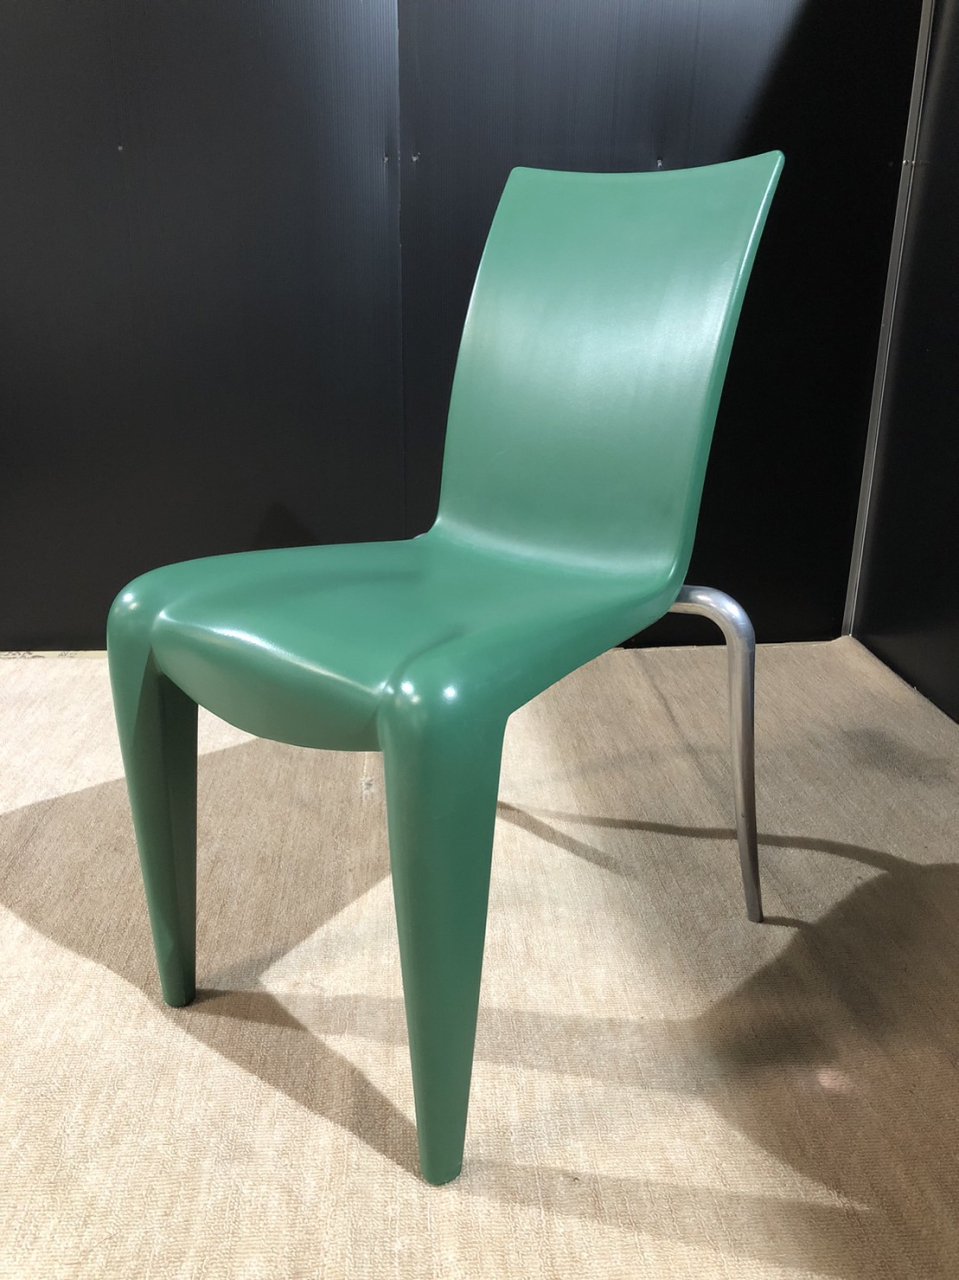 ☆vitra ヴィトラ LOUIS20 ルイ20 チェア☆ 深緑 by STAKCK フィリップ 